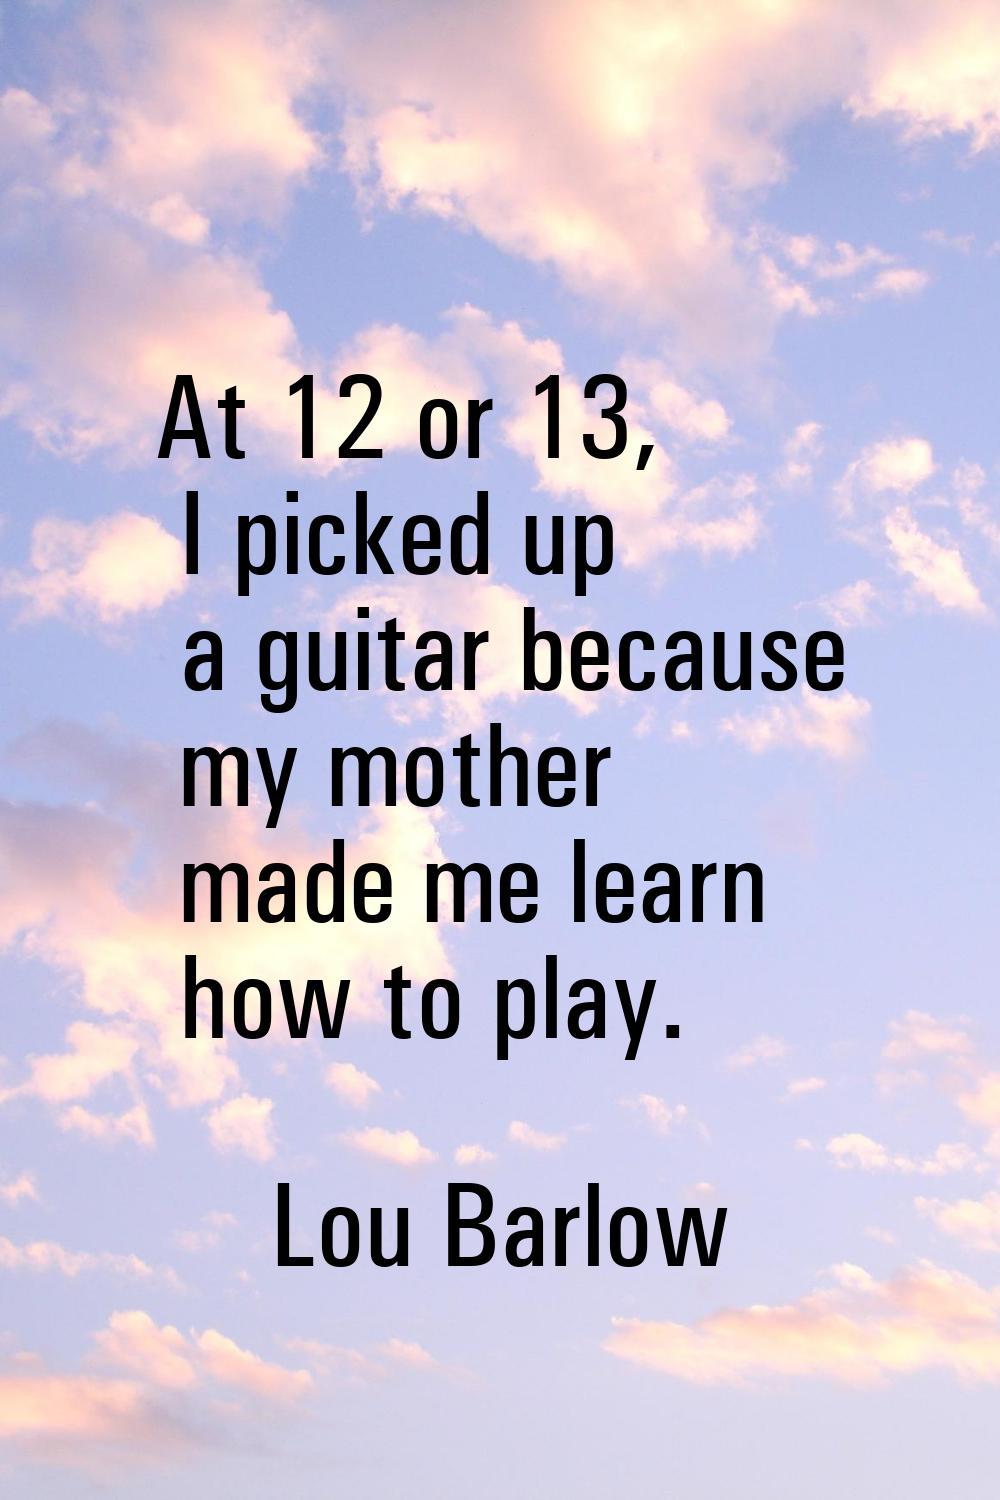 At 12 or 13, I picked up a guitar because my mother made me learn how to play.